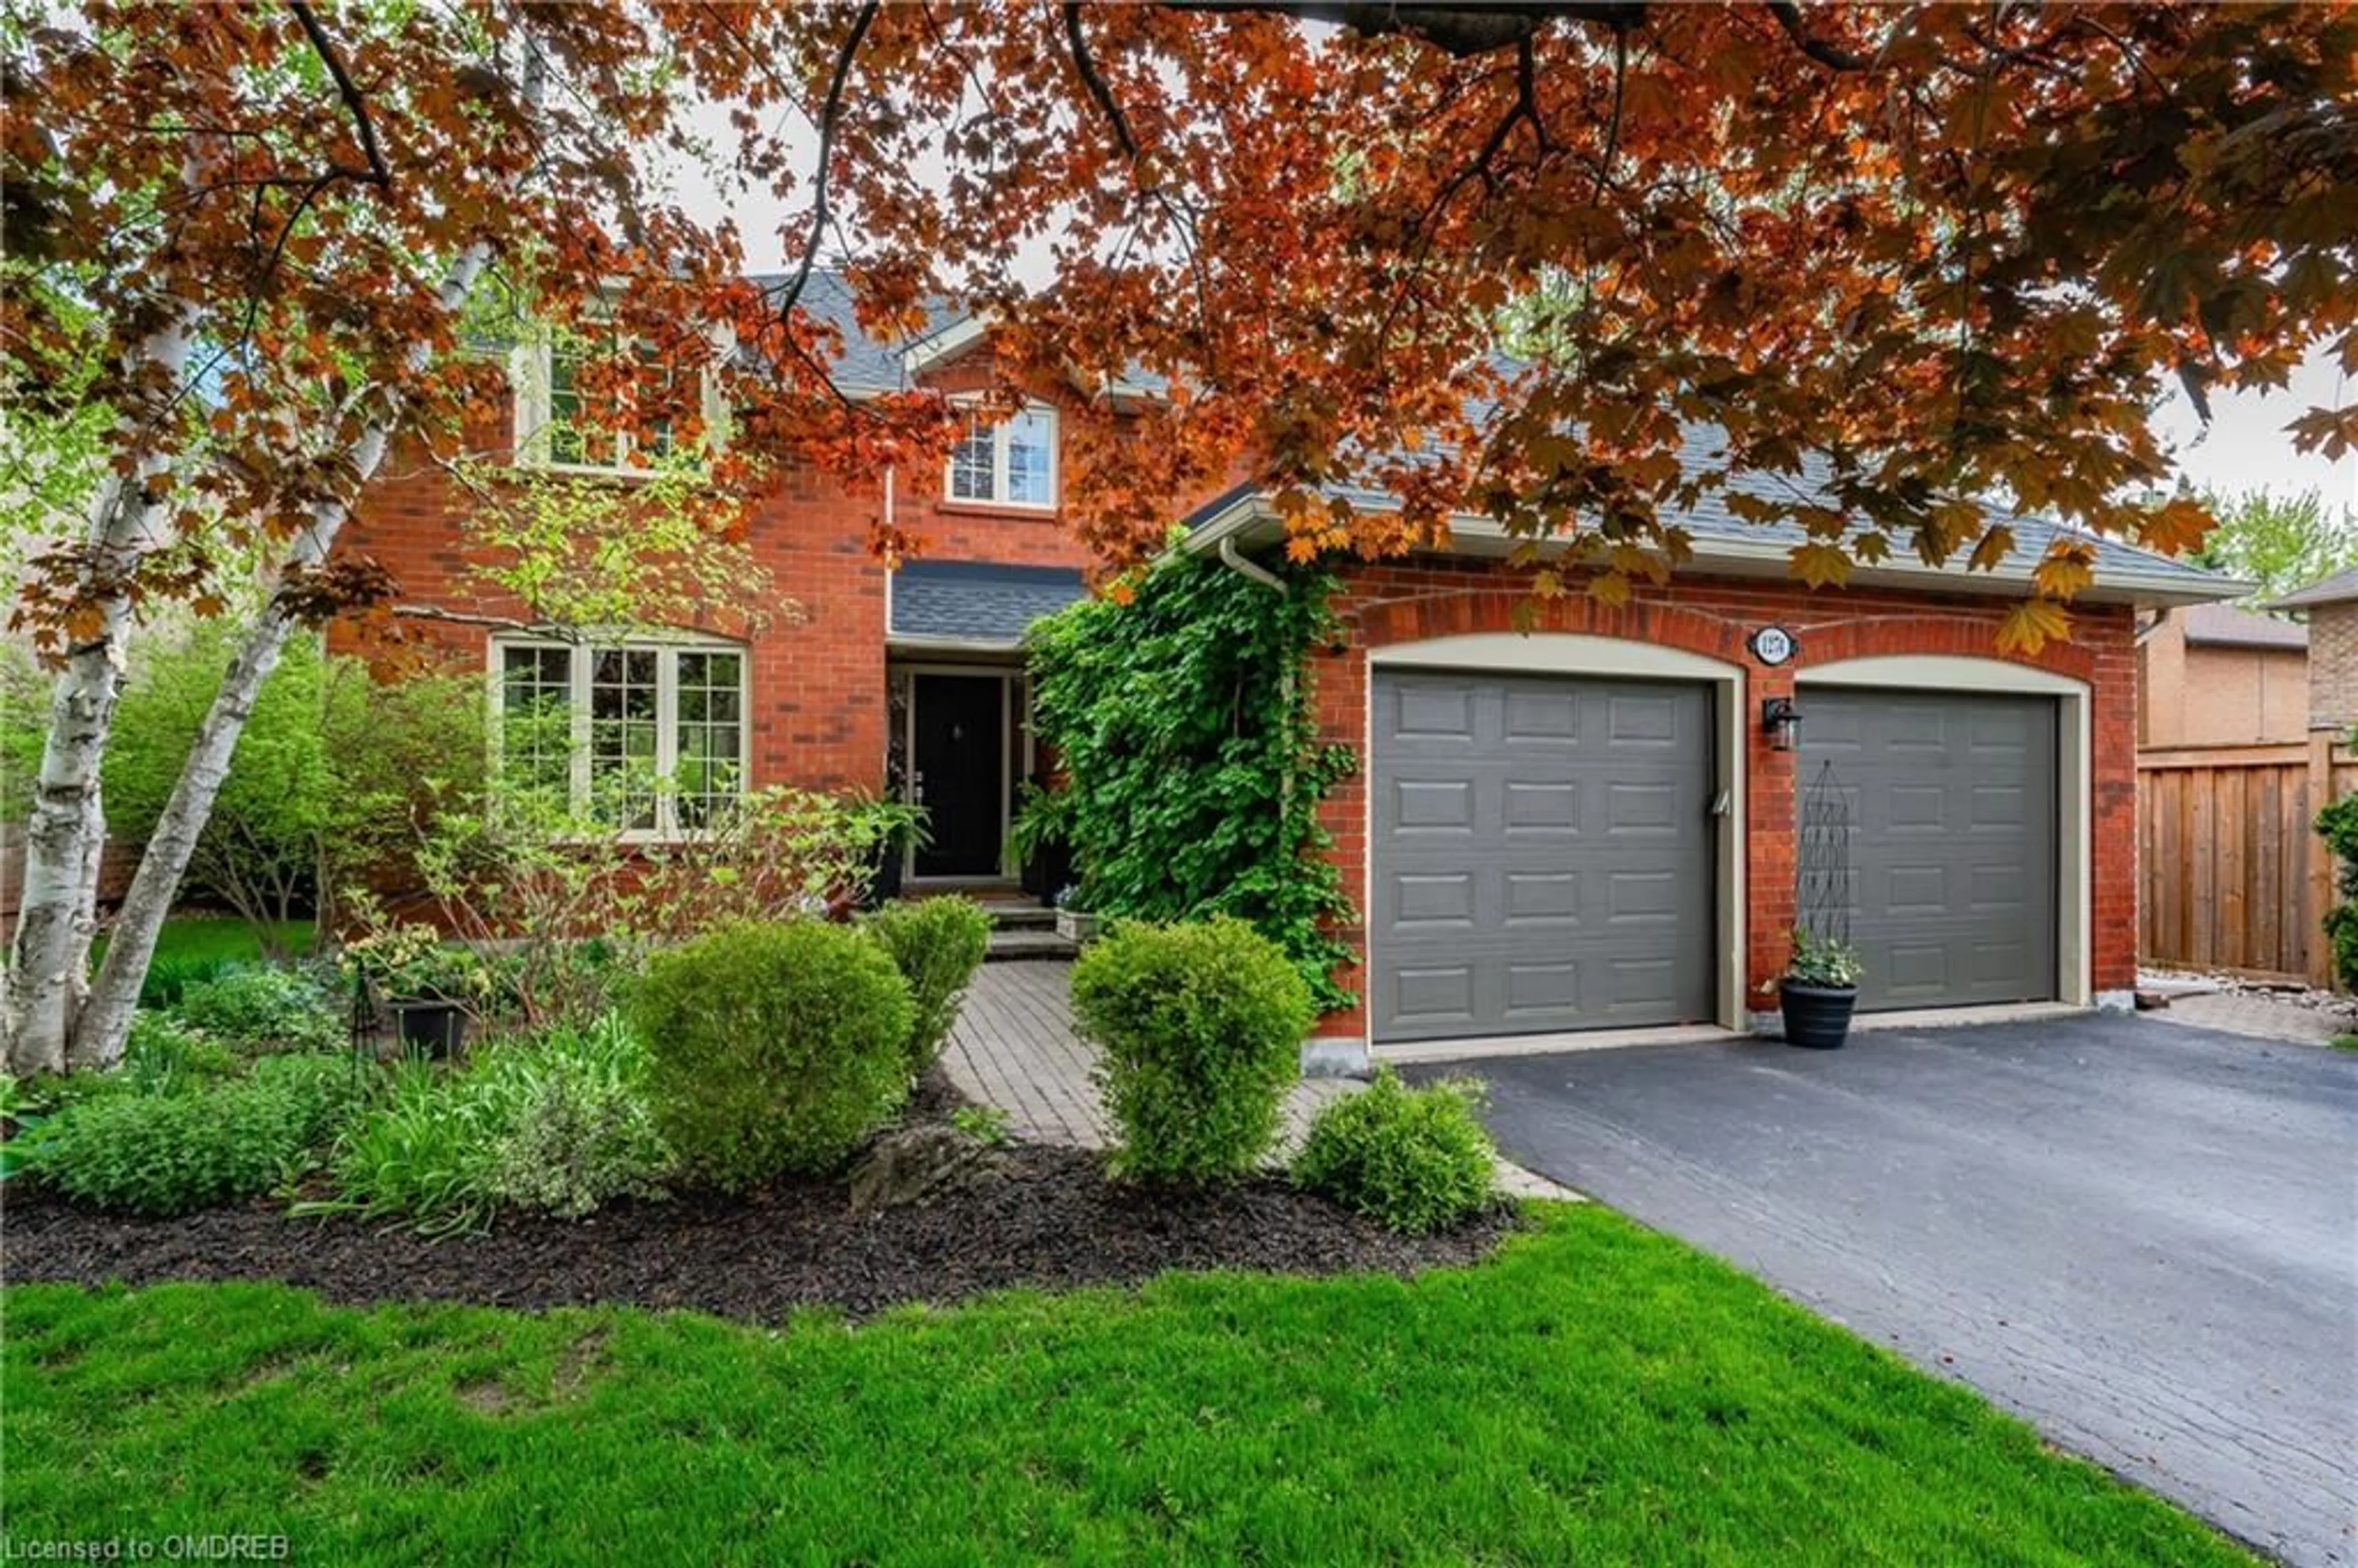 Home with brick exterior material for 1274 Fairmeadow Trail, Oakville Ontario L6M 2M3